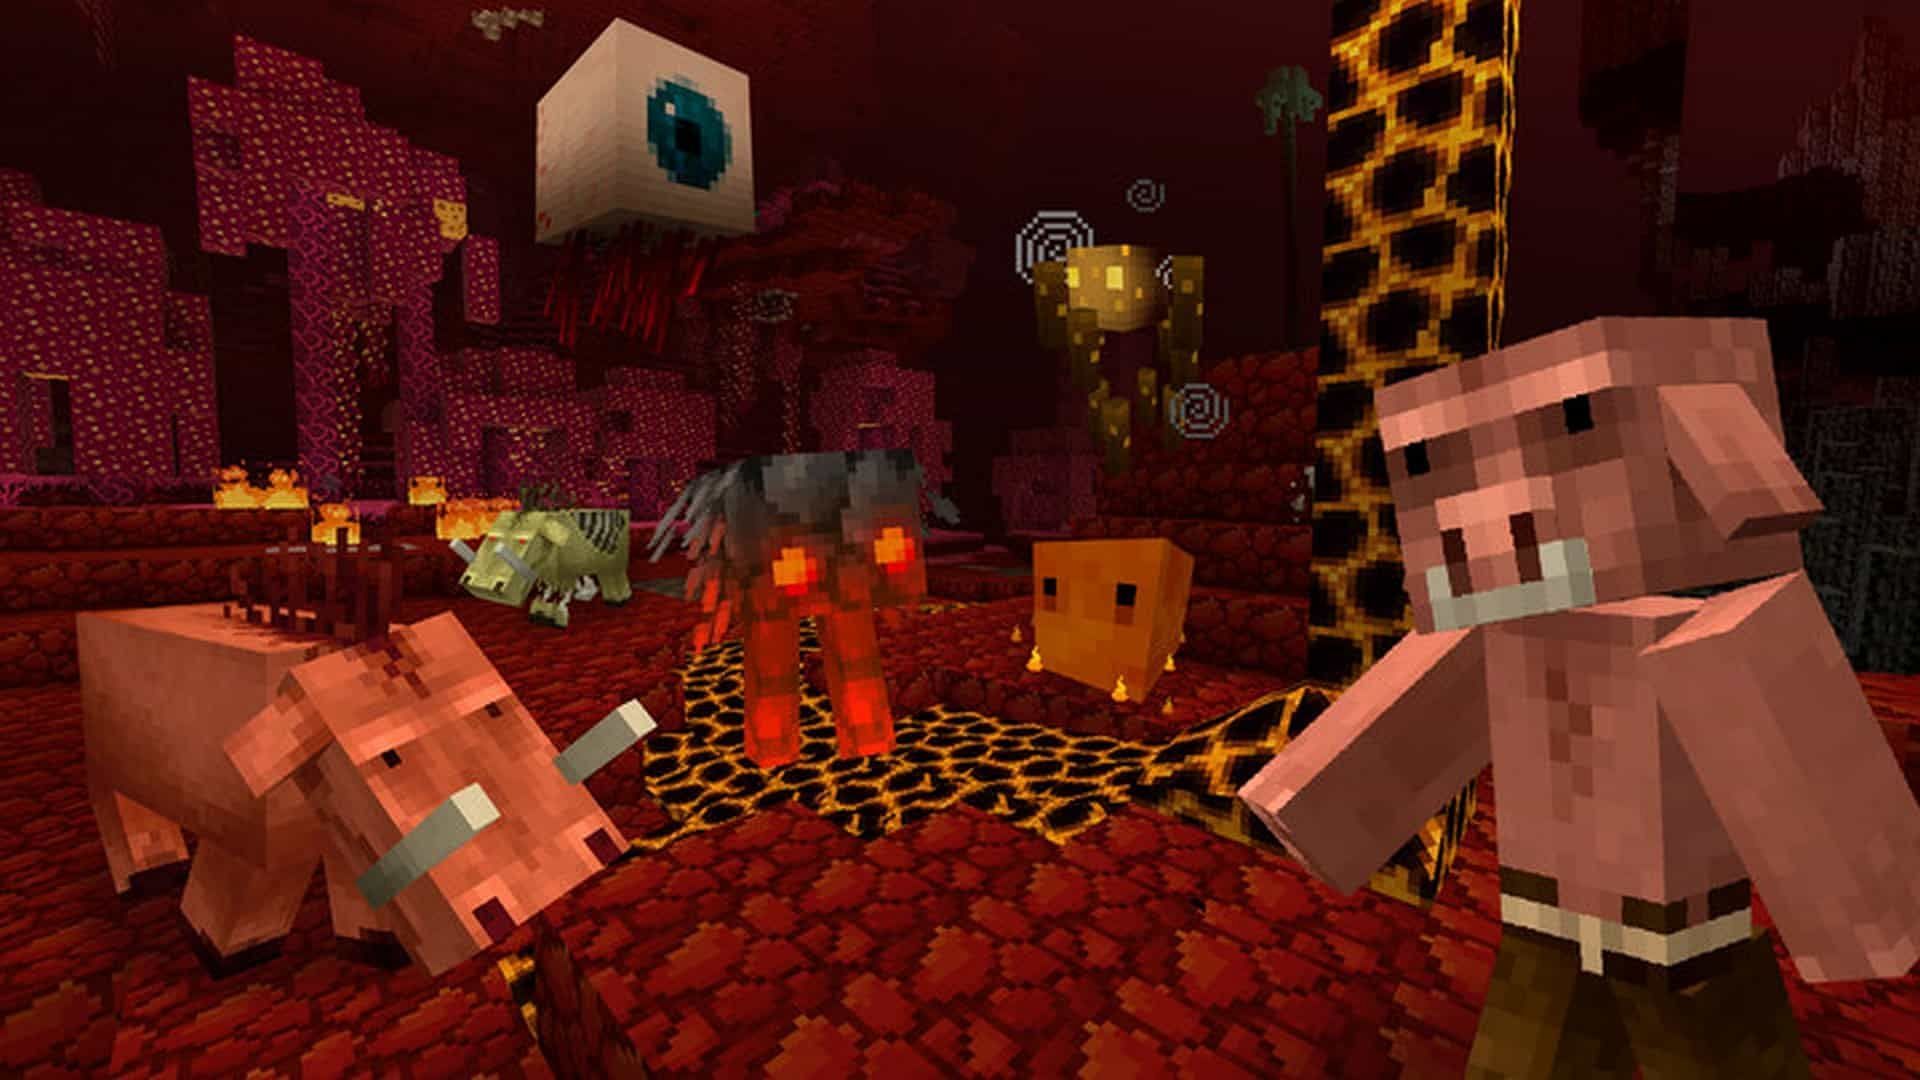 JoliCraft texture pack completely changes how the blocks and mobs look in Minecraft 1.19 (Image via ResorcePack.net)